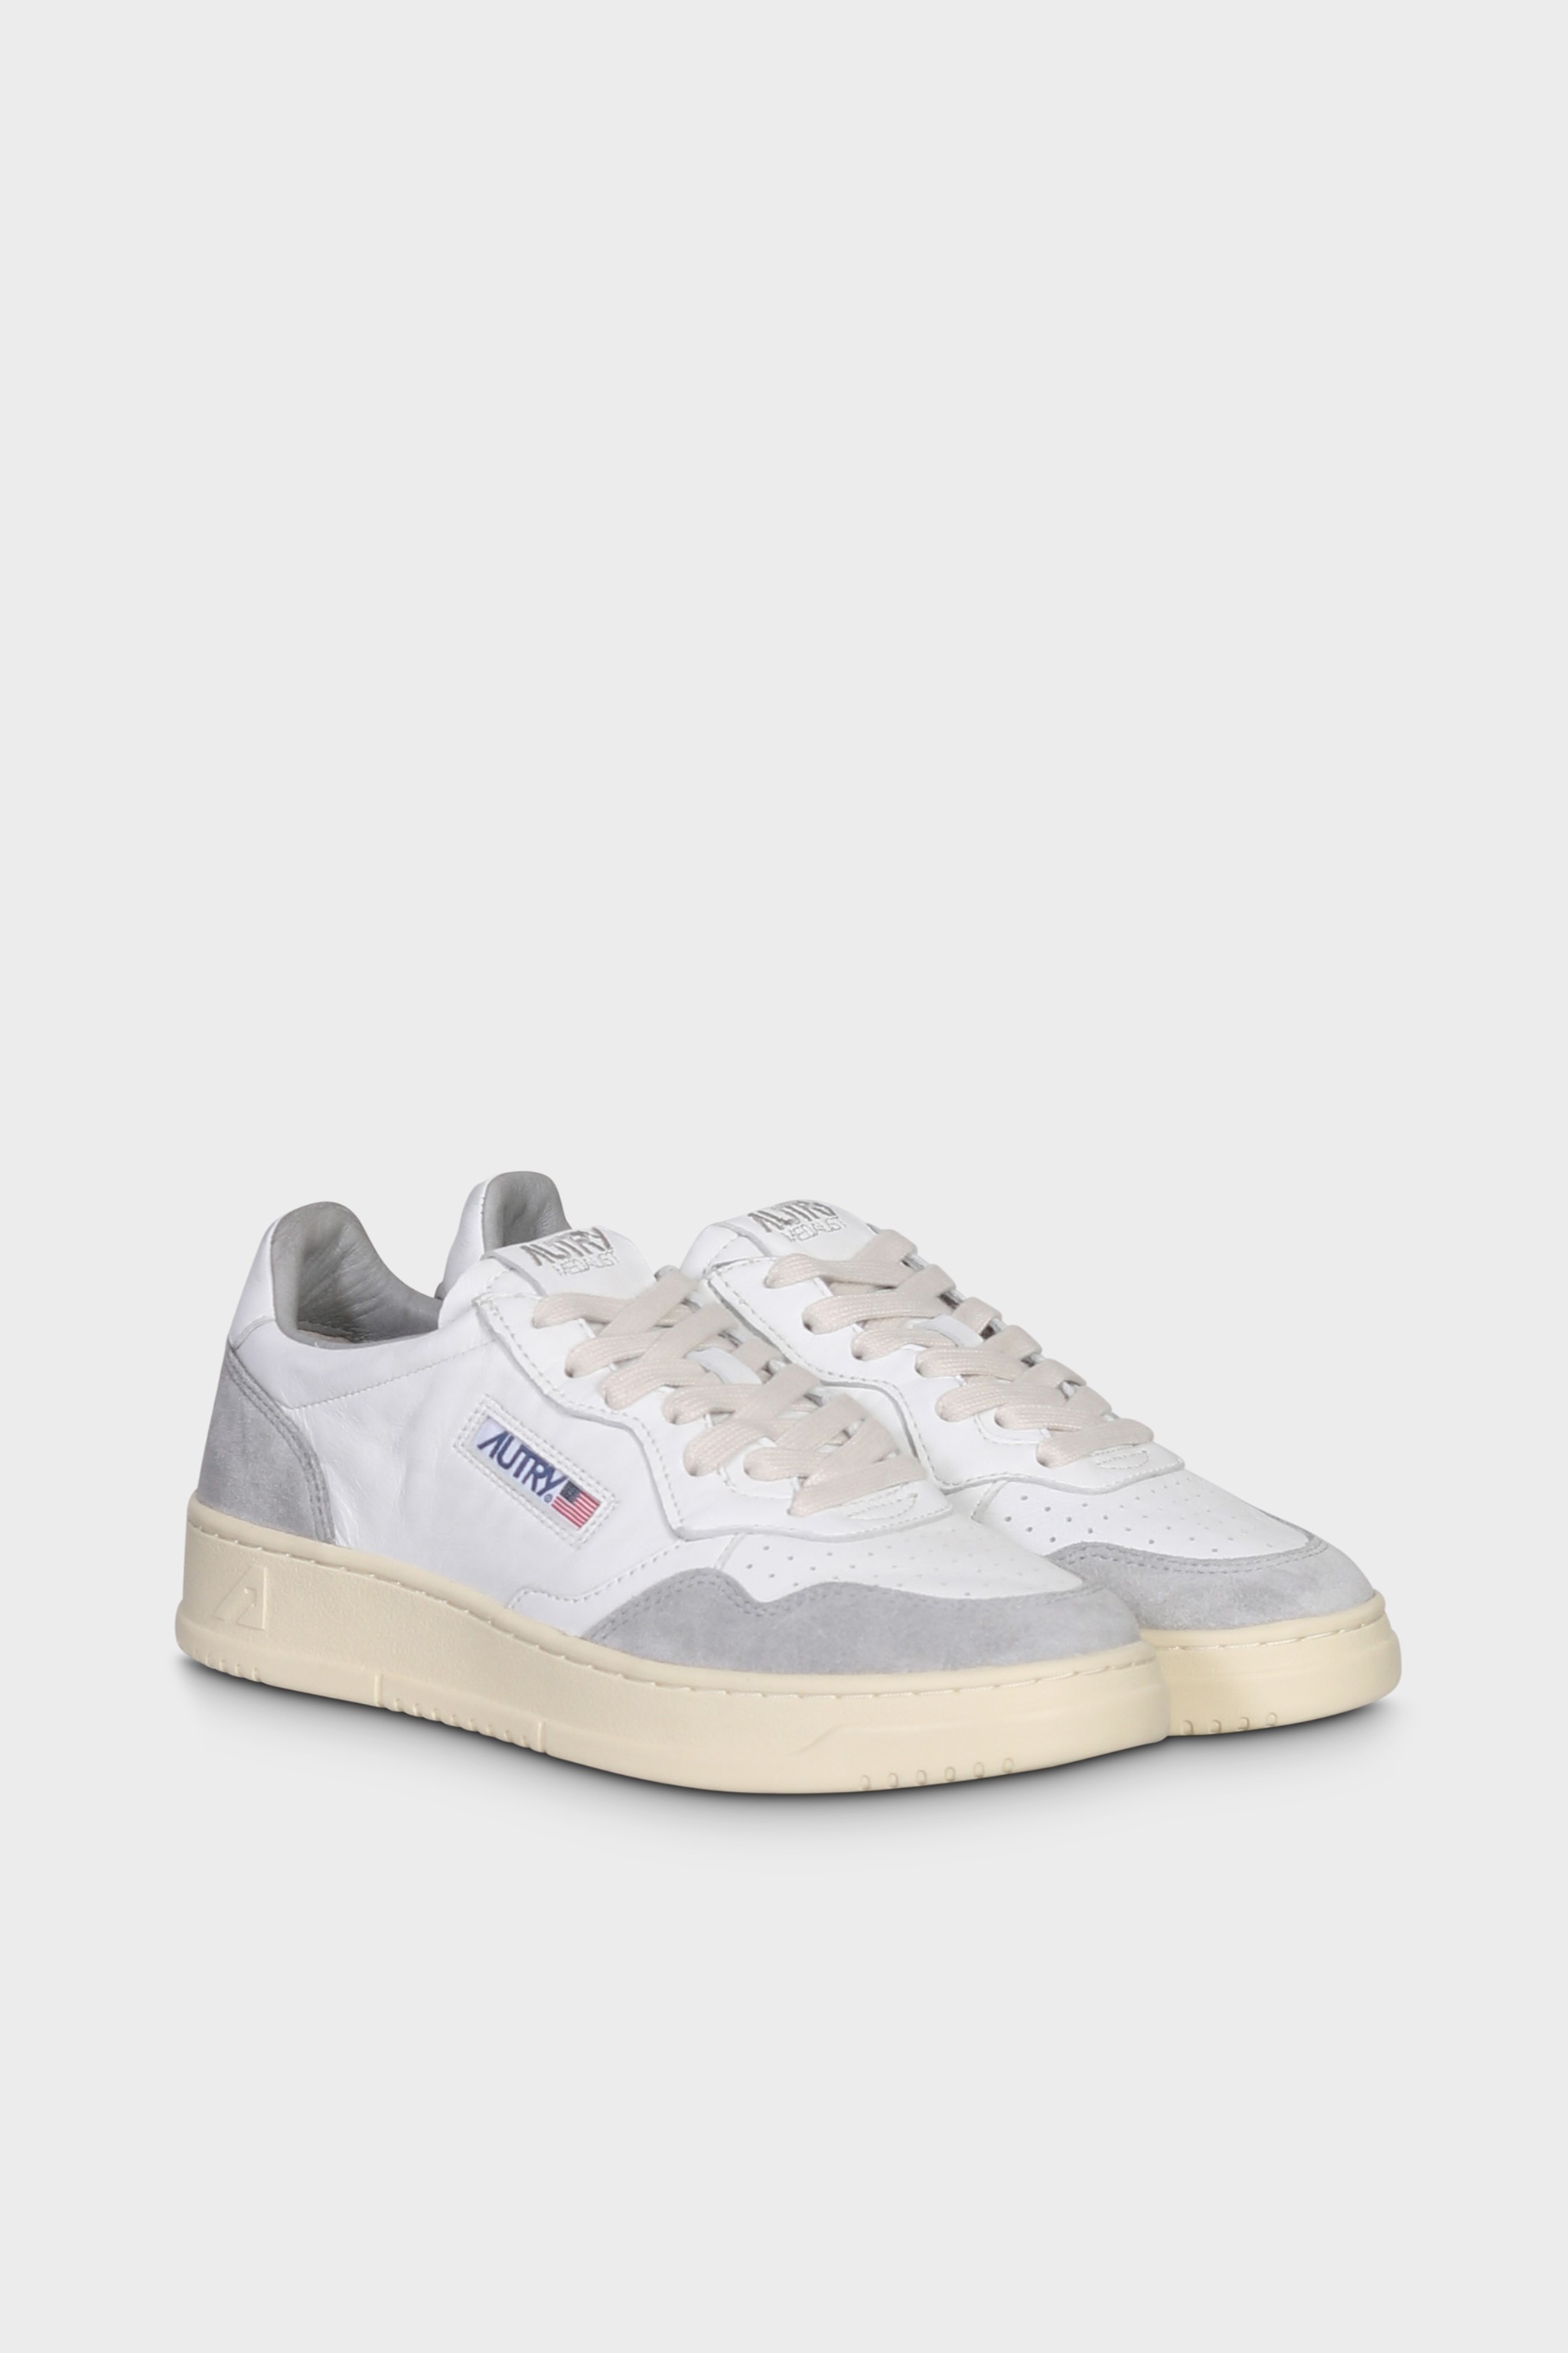 AUTRY ACTION SHOES Medalist Low Sneaker Goat Suede White/Grey 40